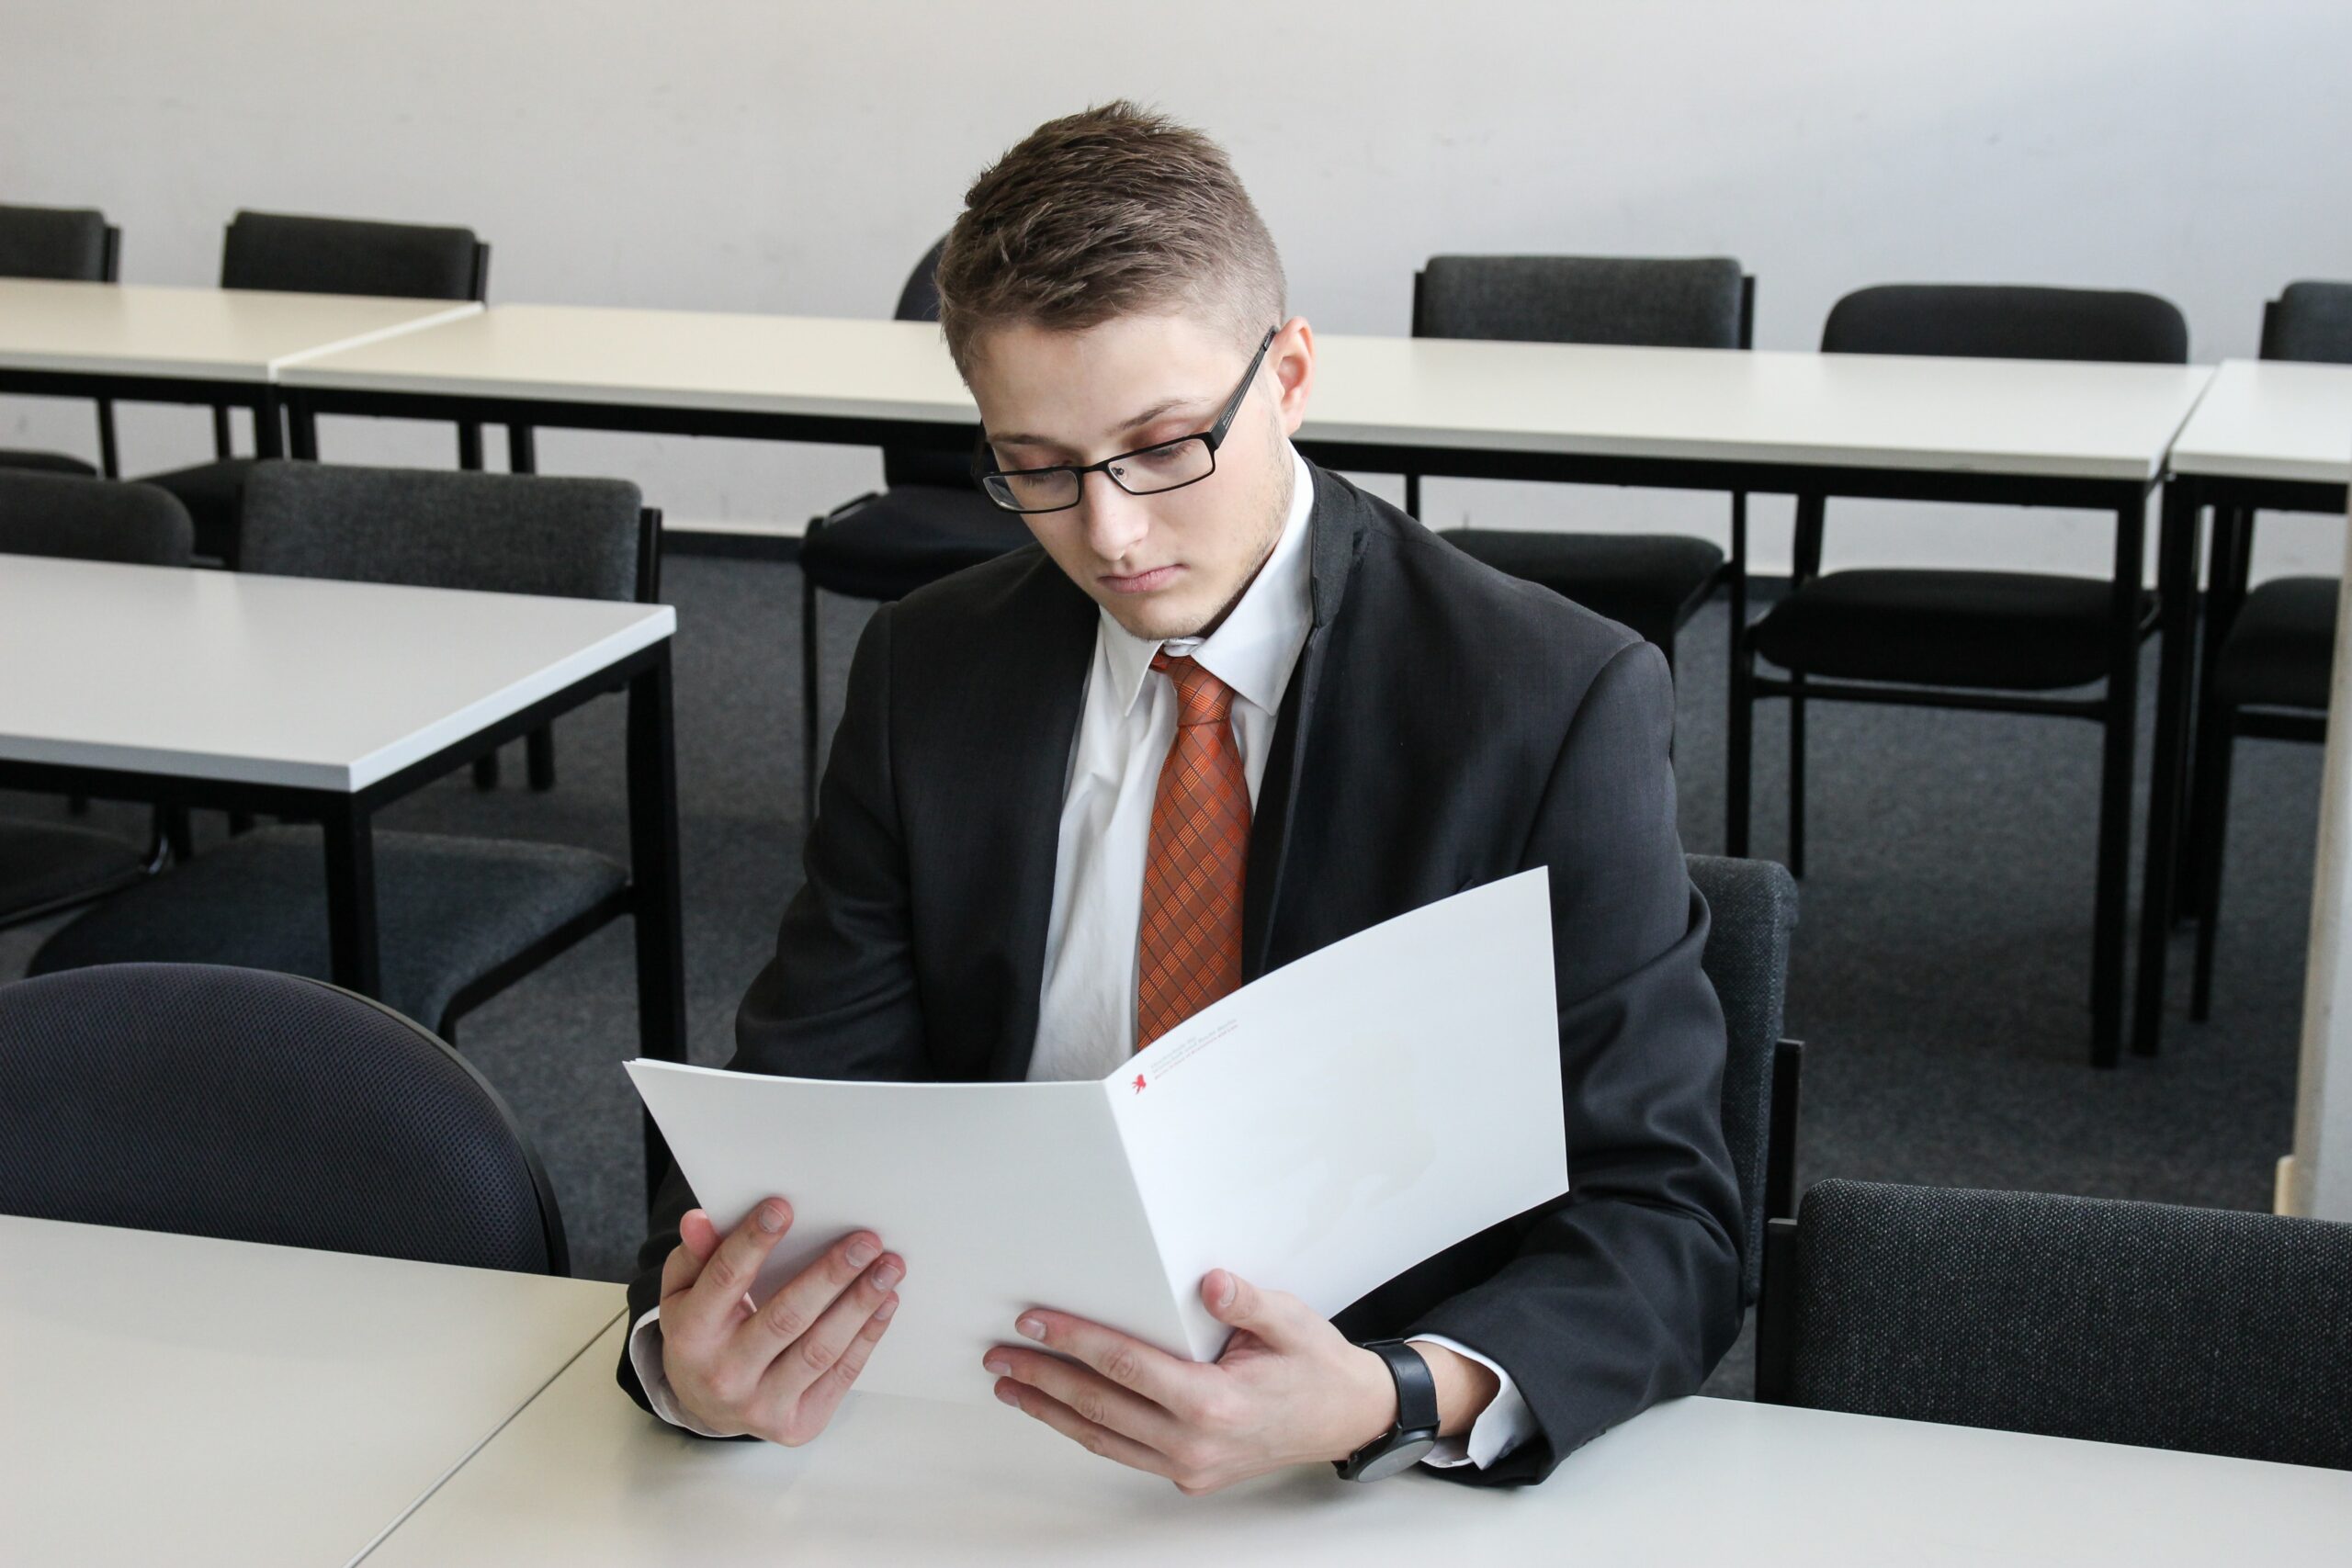 Your resume is still important – unfortunately!